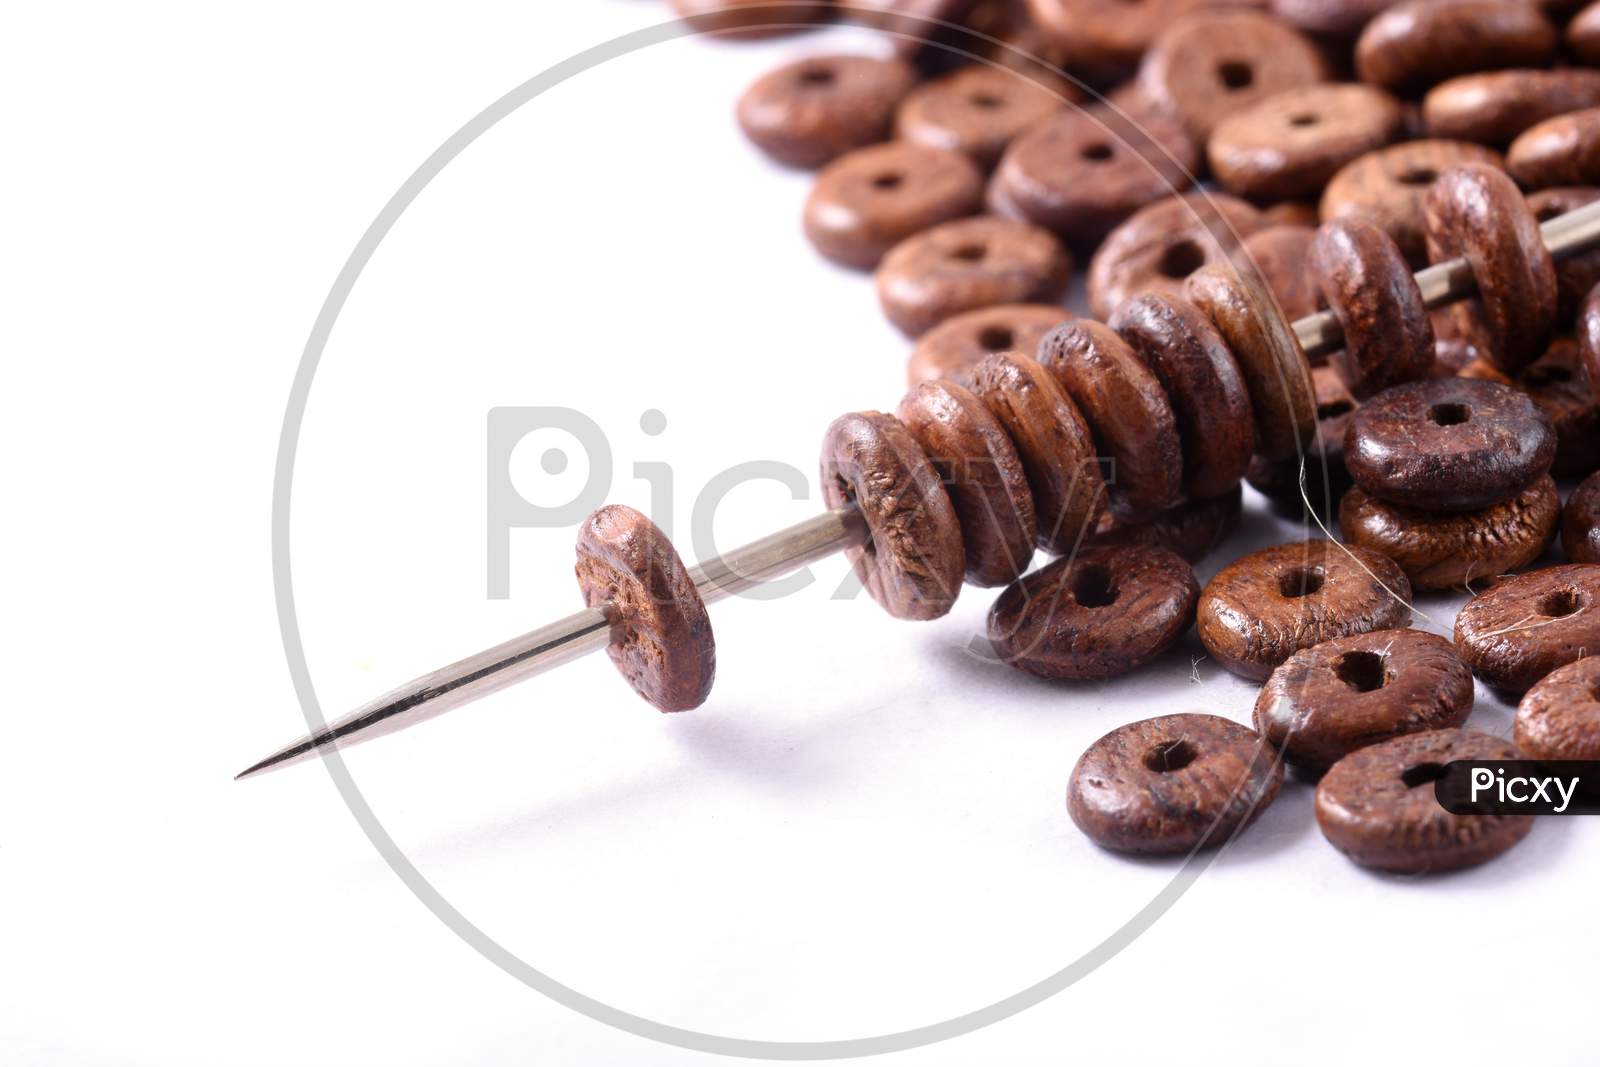 Wooden Beads Spread On White Background With Needle. Beads With Needle . Close Up, Macro.